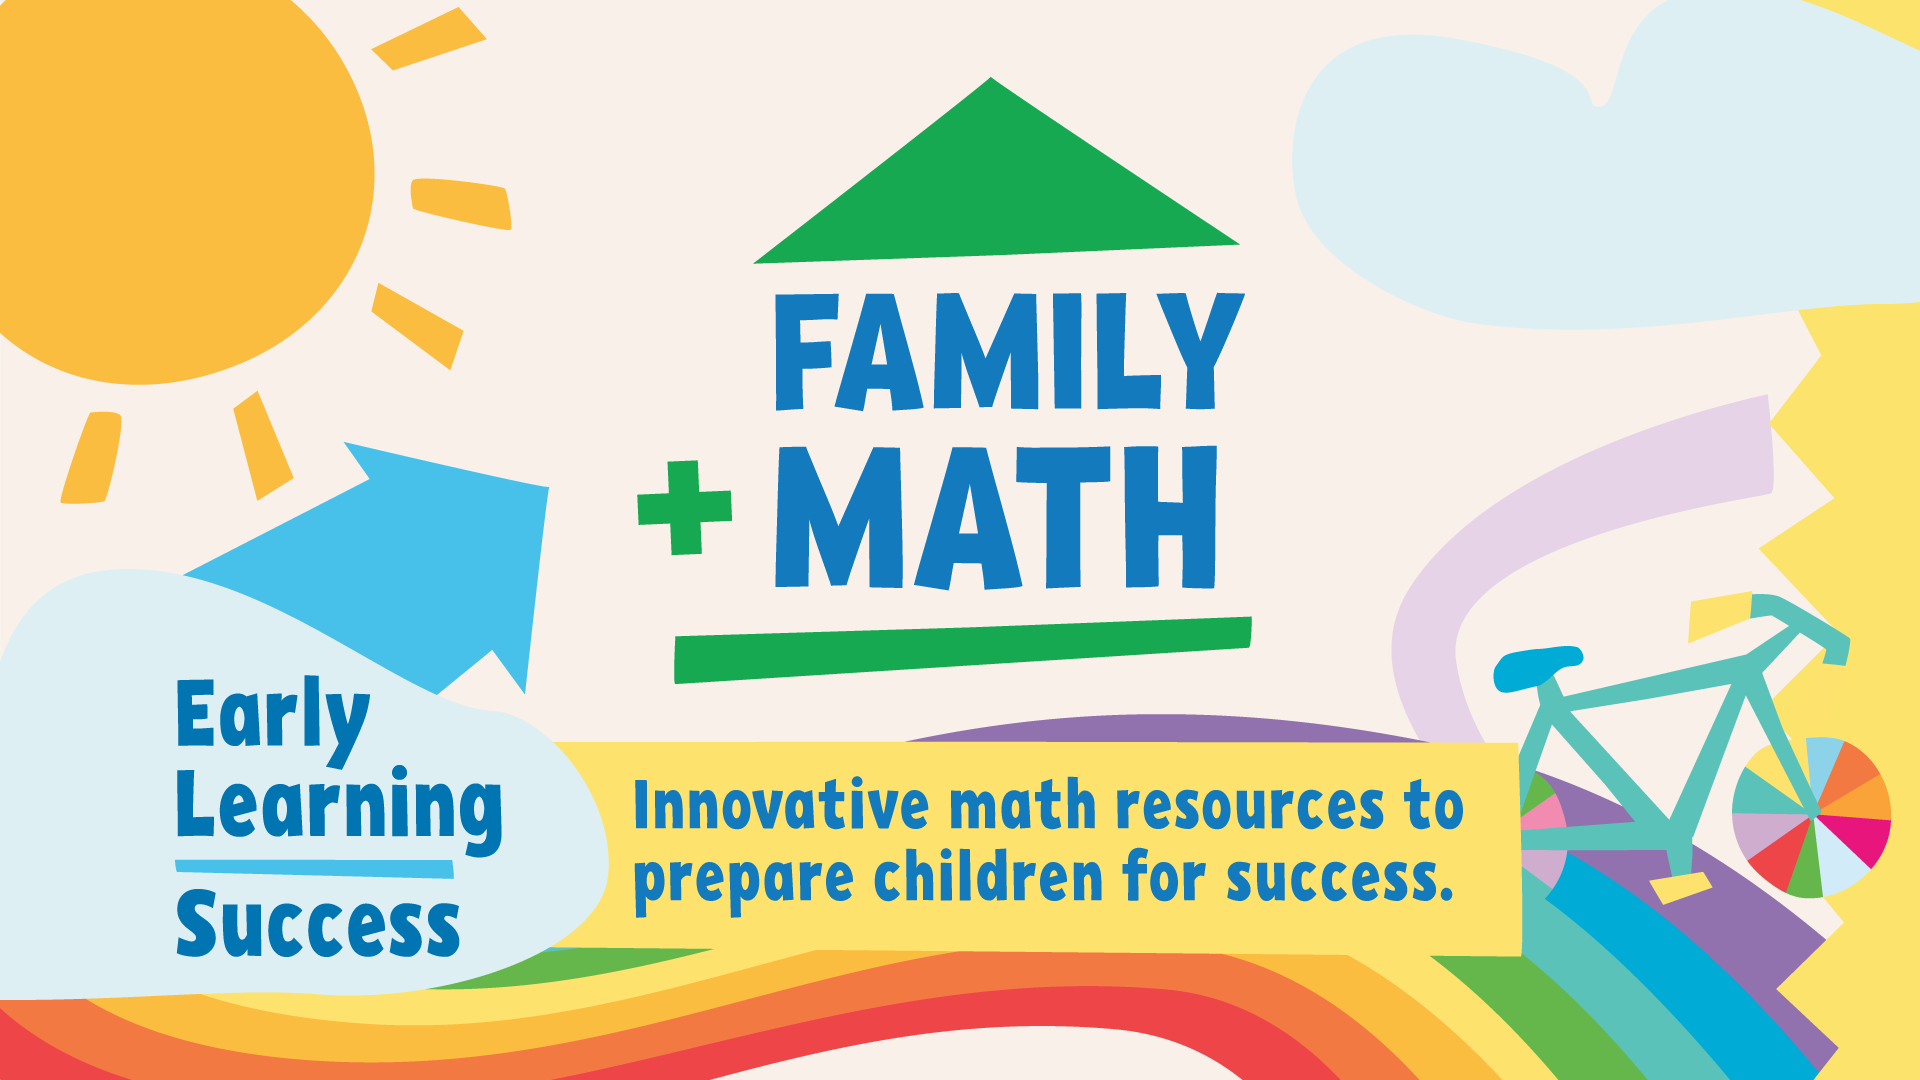 Family math innovative math resources to prepare children for success